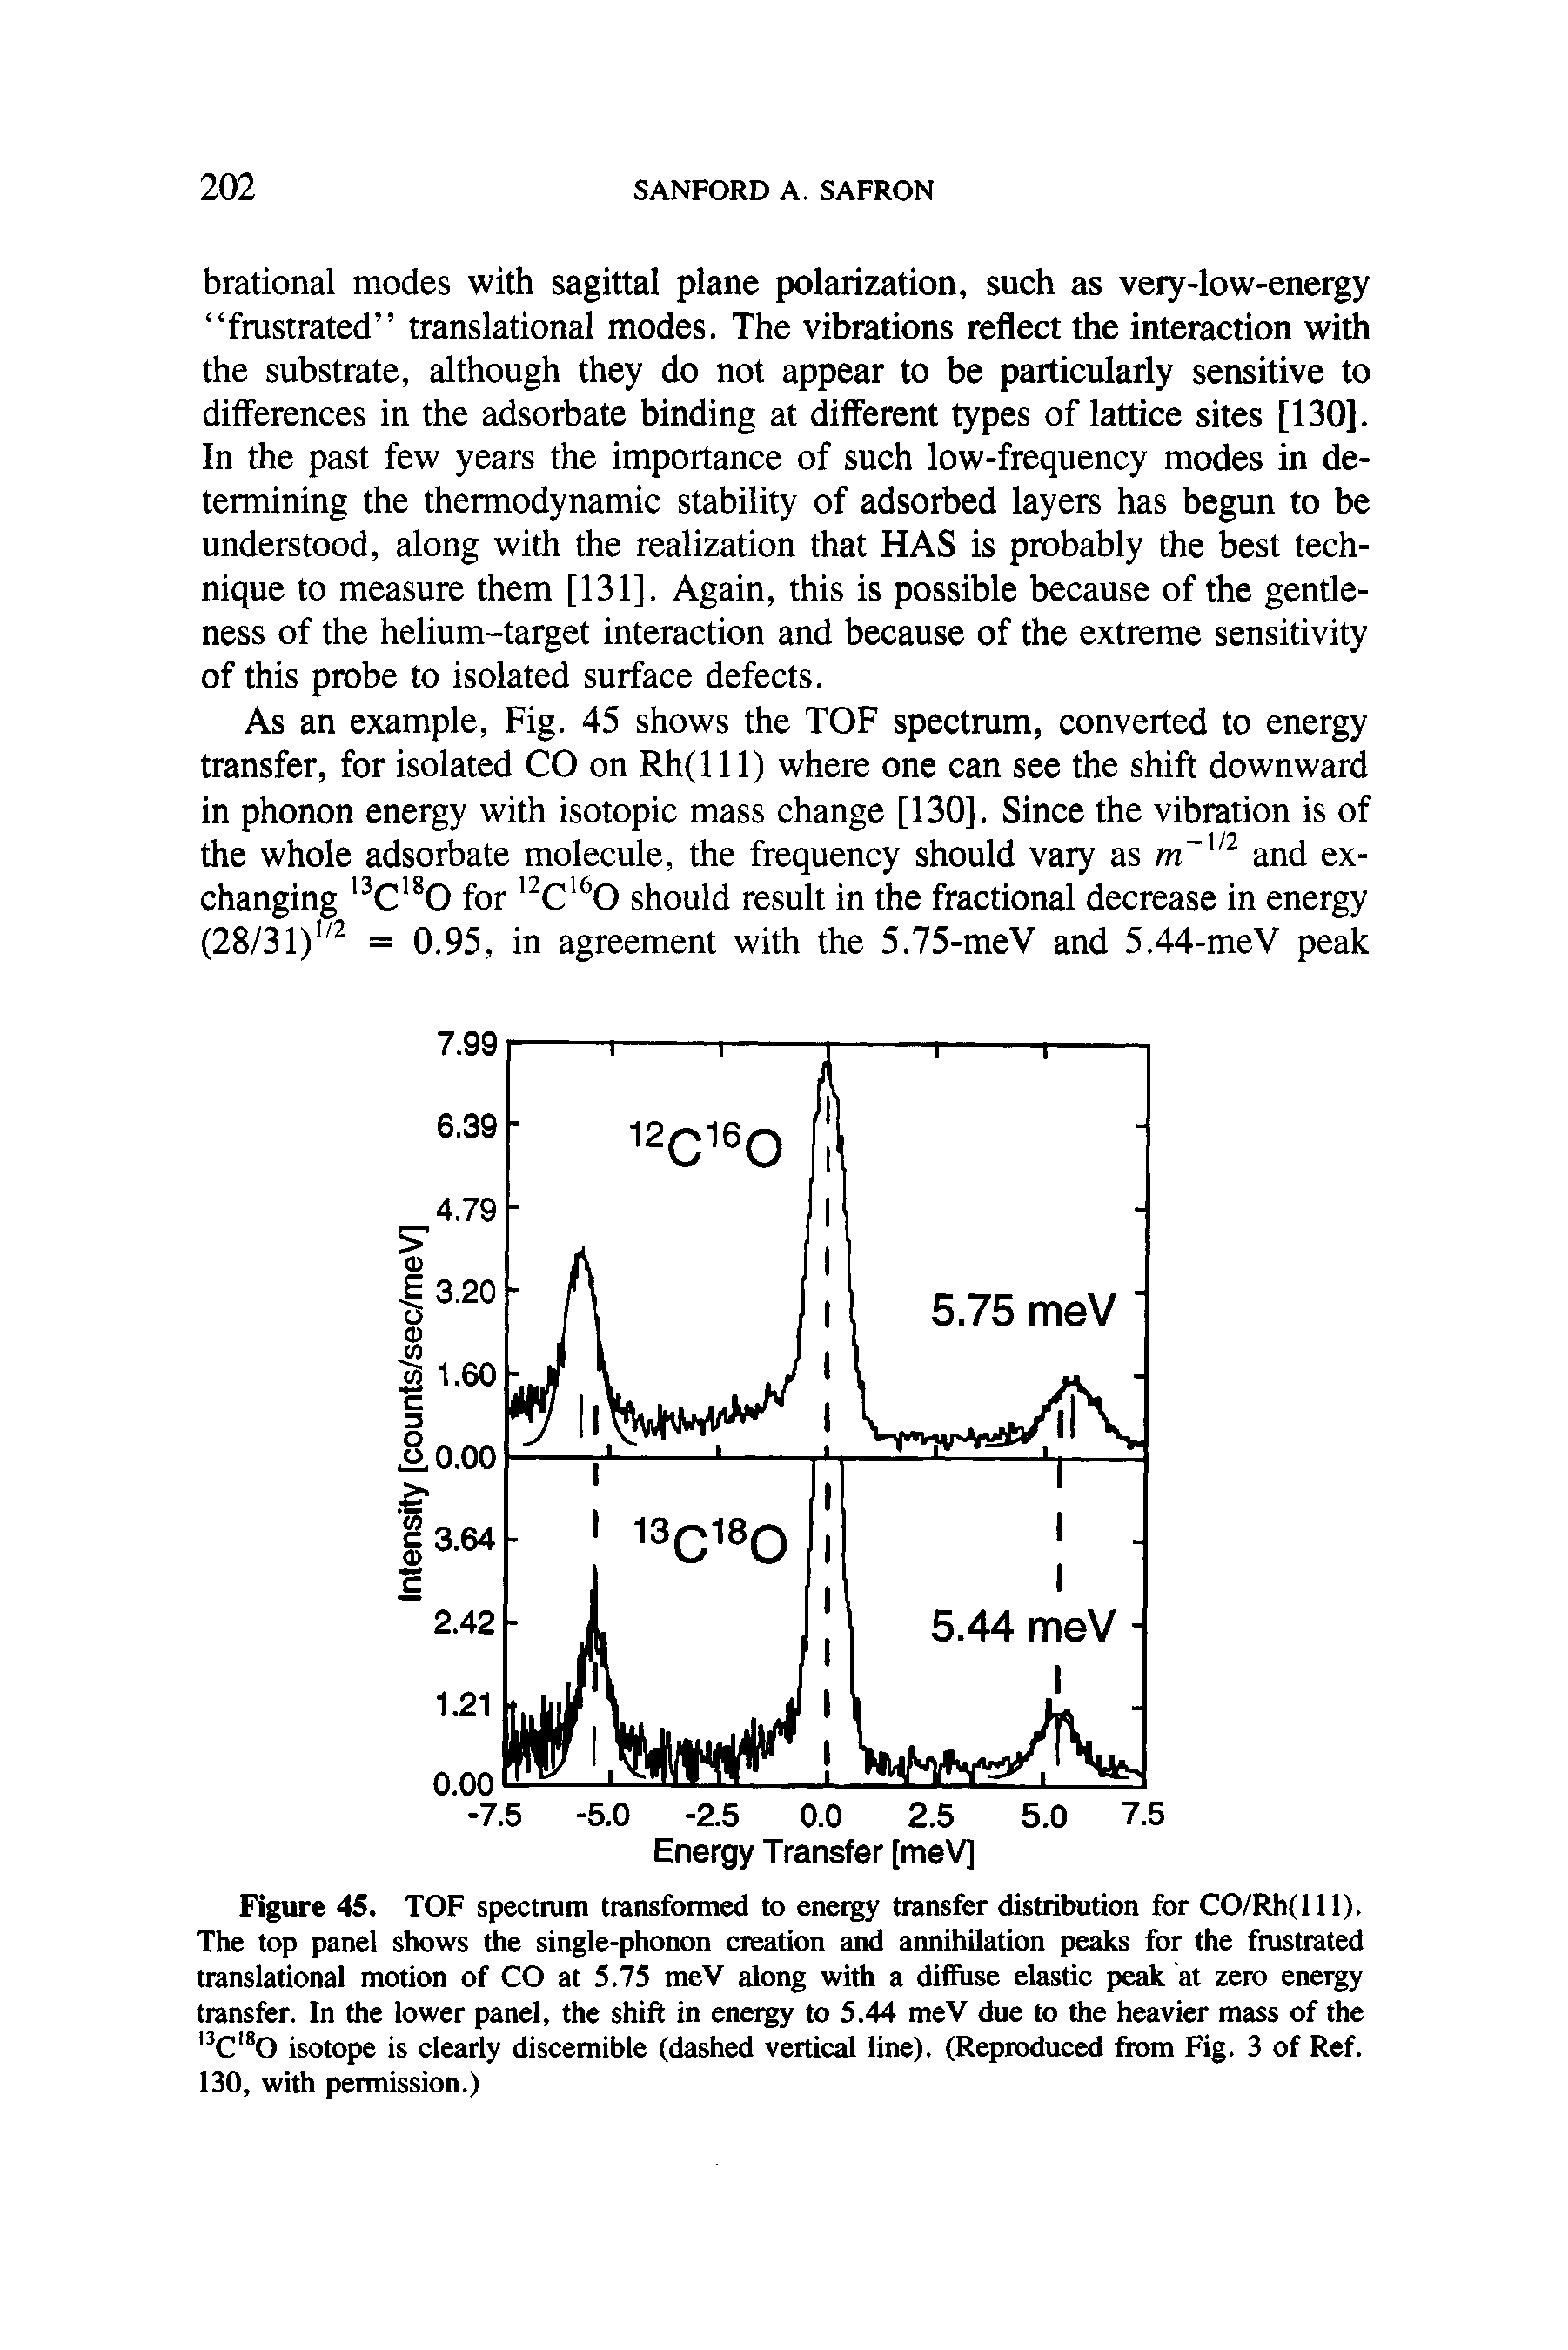 Figure 45. TOF spectrum transformed to energy transfer distribution for CO/Rh(lll). The top panel shows the single-phonon creation and annihilation peaks for the fmstrated translational motion of CO at 5.75 meV along with a difiuse elastic peak at zero energy transfer. In the lower panel, the shift in energy to 5.44 meV due to the heavier mass of the C 0 isotope is clearly discernible (dashed vertical line). (Reproduced fiom Fig. 3 of Ref. 130, with permission.)...